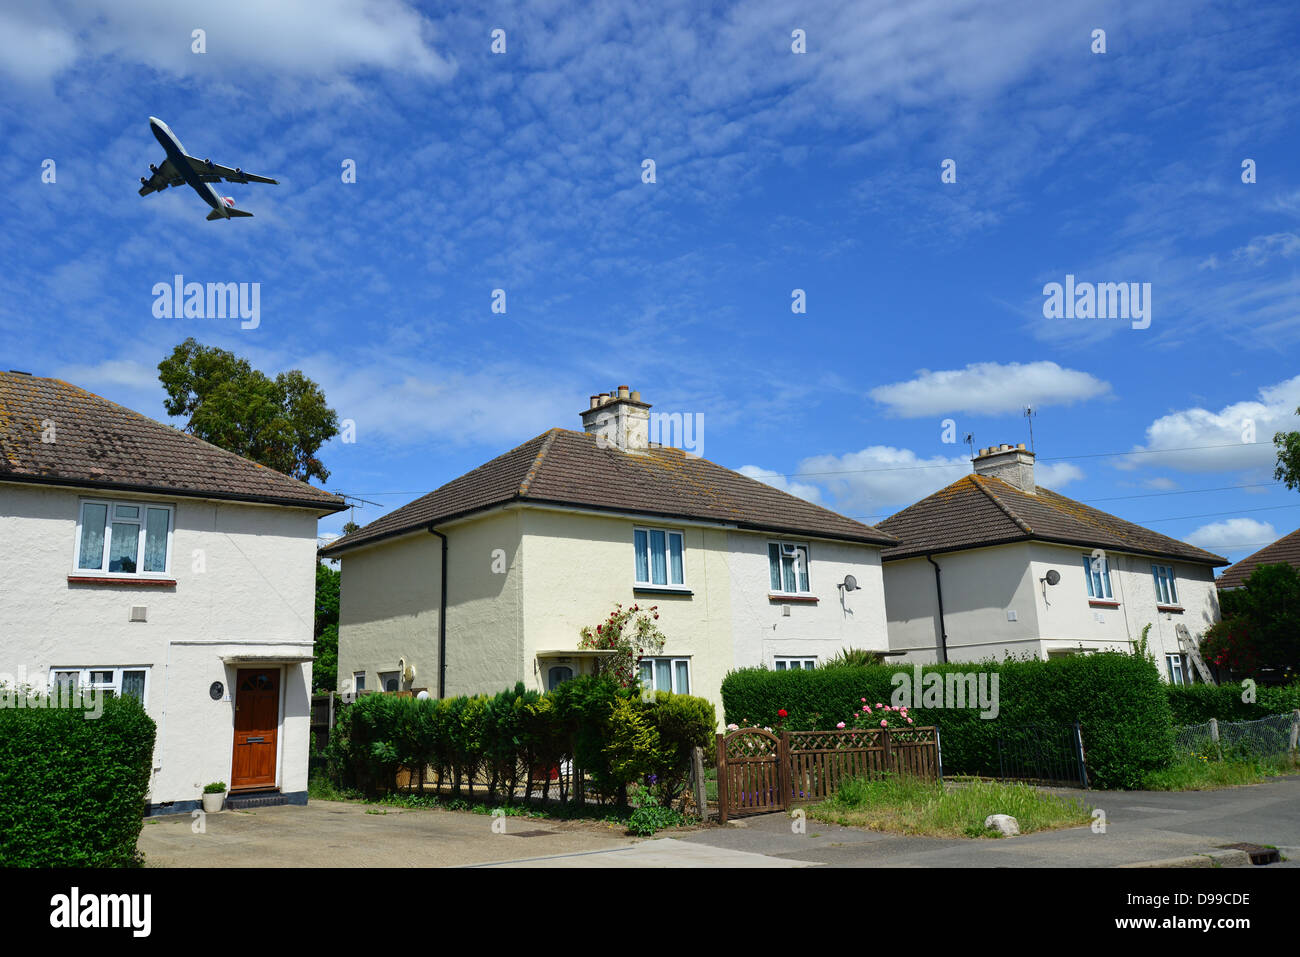 Aircraft taking off from Heathrow Airport over houses, Horton Road, Stanwell Moor, Surrey, England, United Kingdom Stock Photo